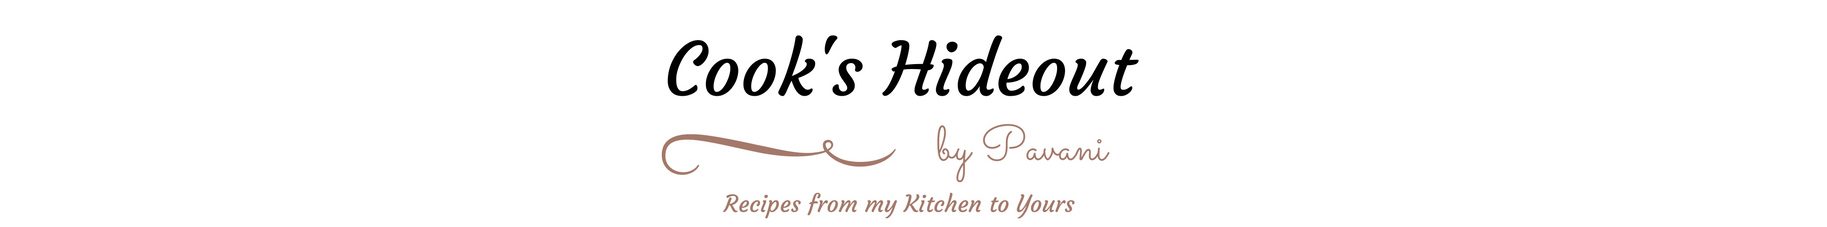 Cook's Hideout - Recipes from my kitchen to yours